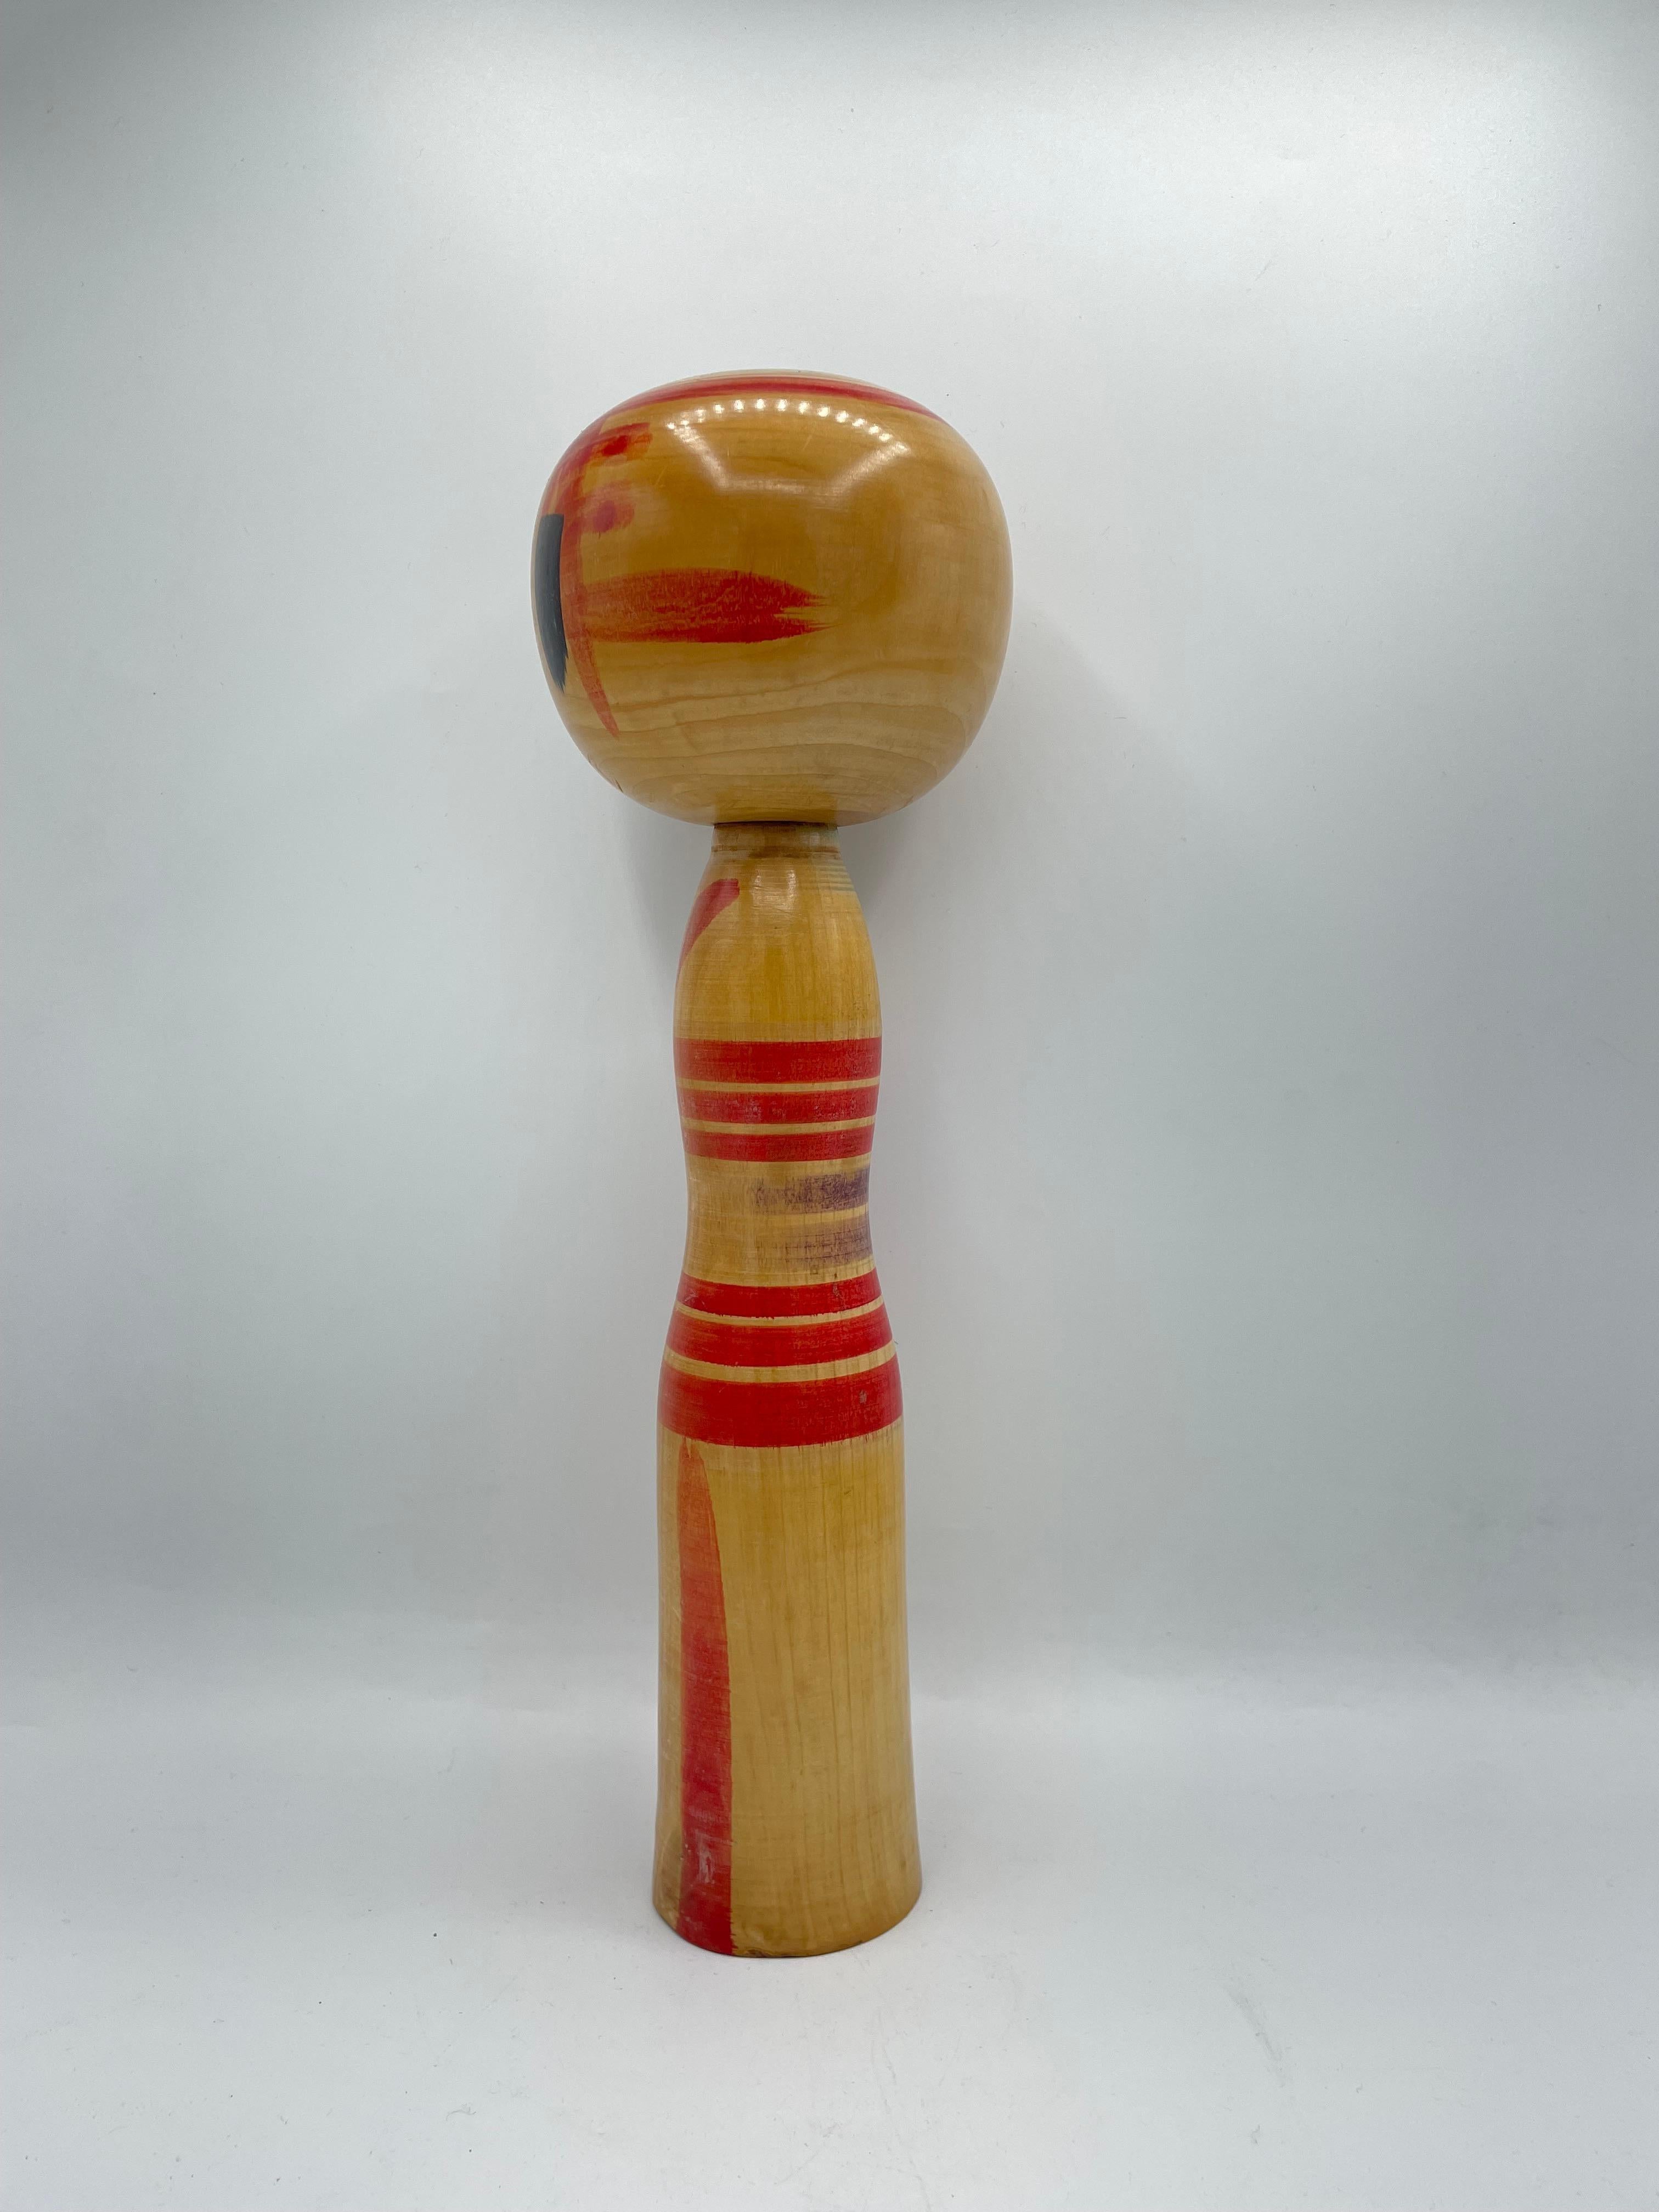 This is a wooden doll which is called Kokeshi in Japanese.
This kokeshi was made in Japan around 1970s by kokeshi artist Hisashiro NIIYAMA.
He was born in Miyagi prefecture in 11th May 1942. His signature is written on the bottom of this kokeshi